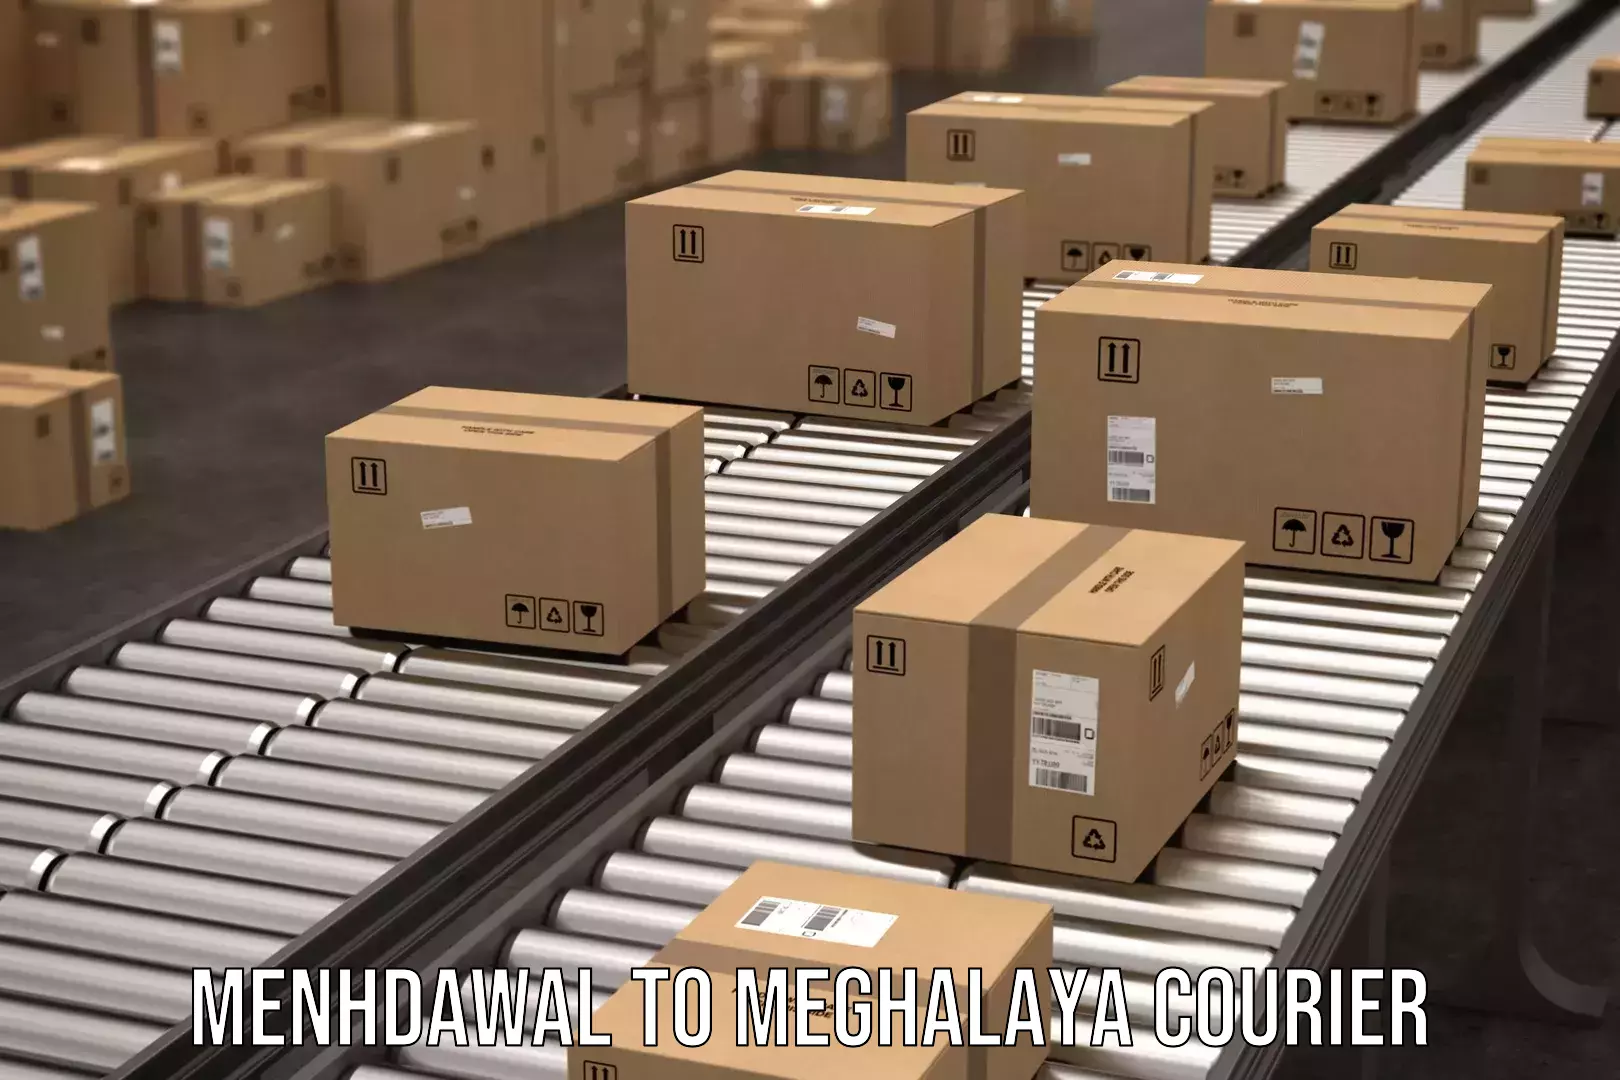 State-of-the-art courier technology Menhdawal to Meghalaya